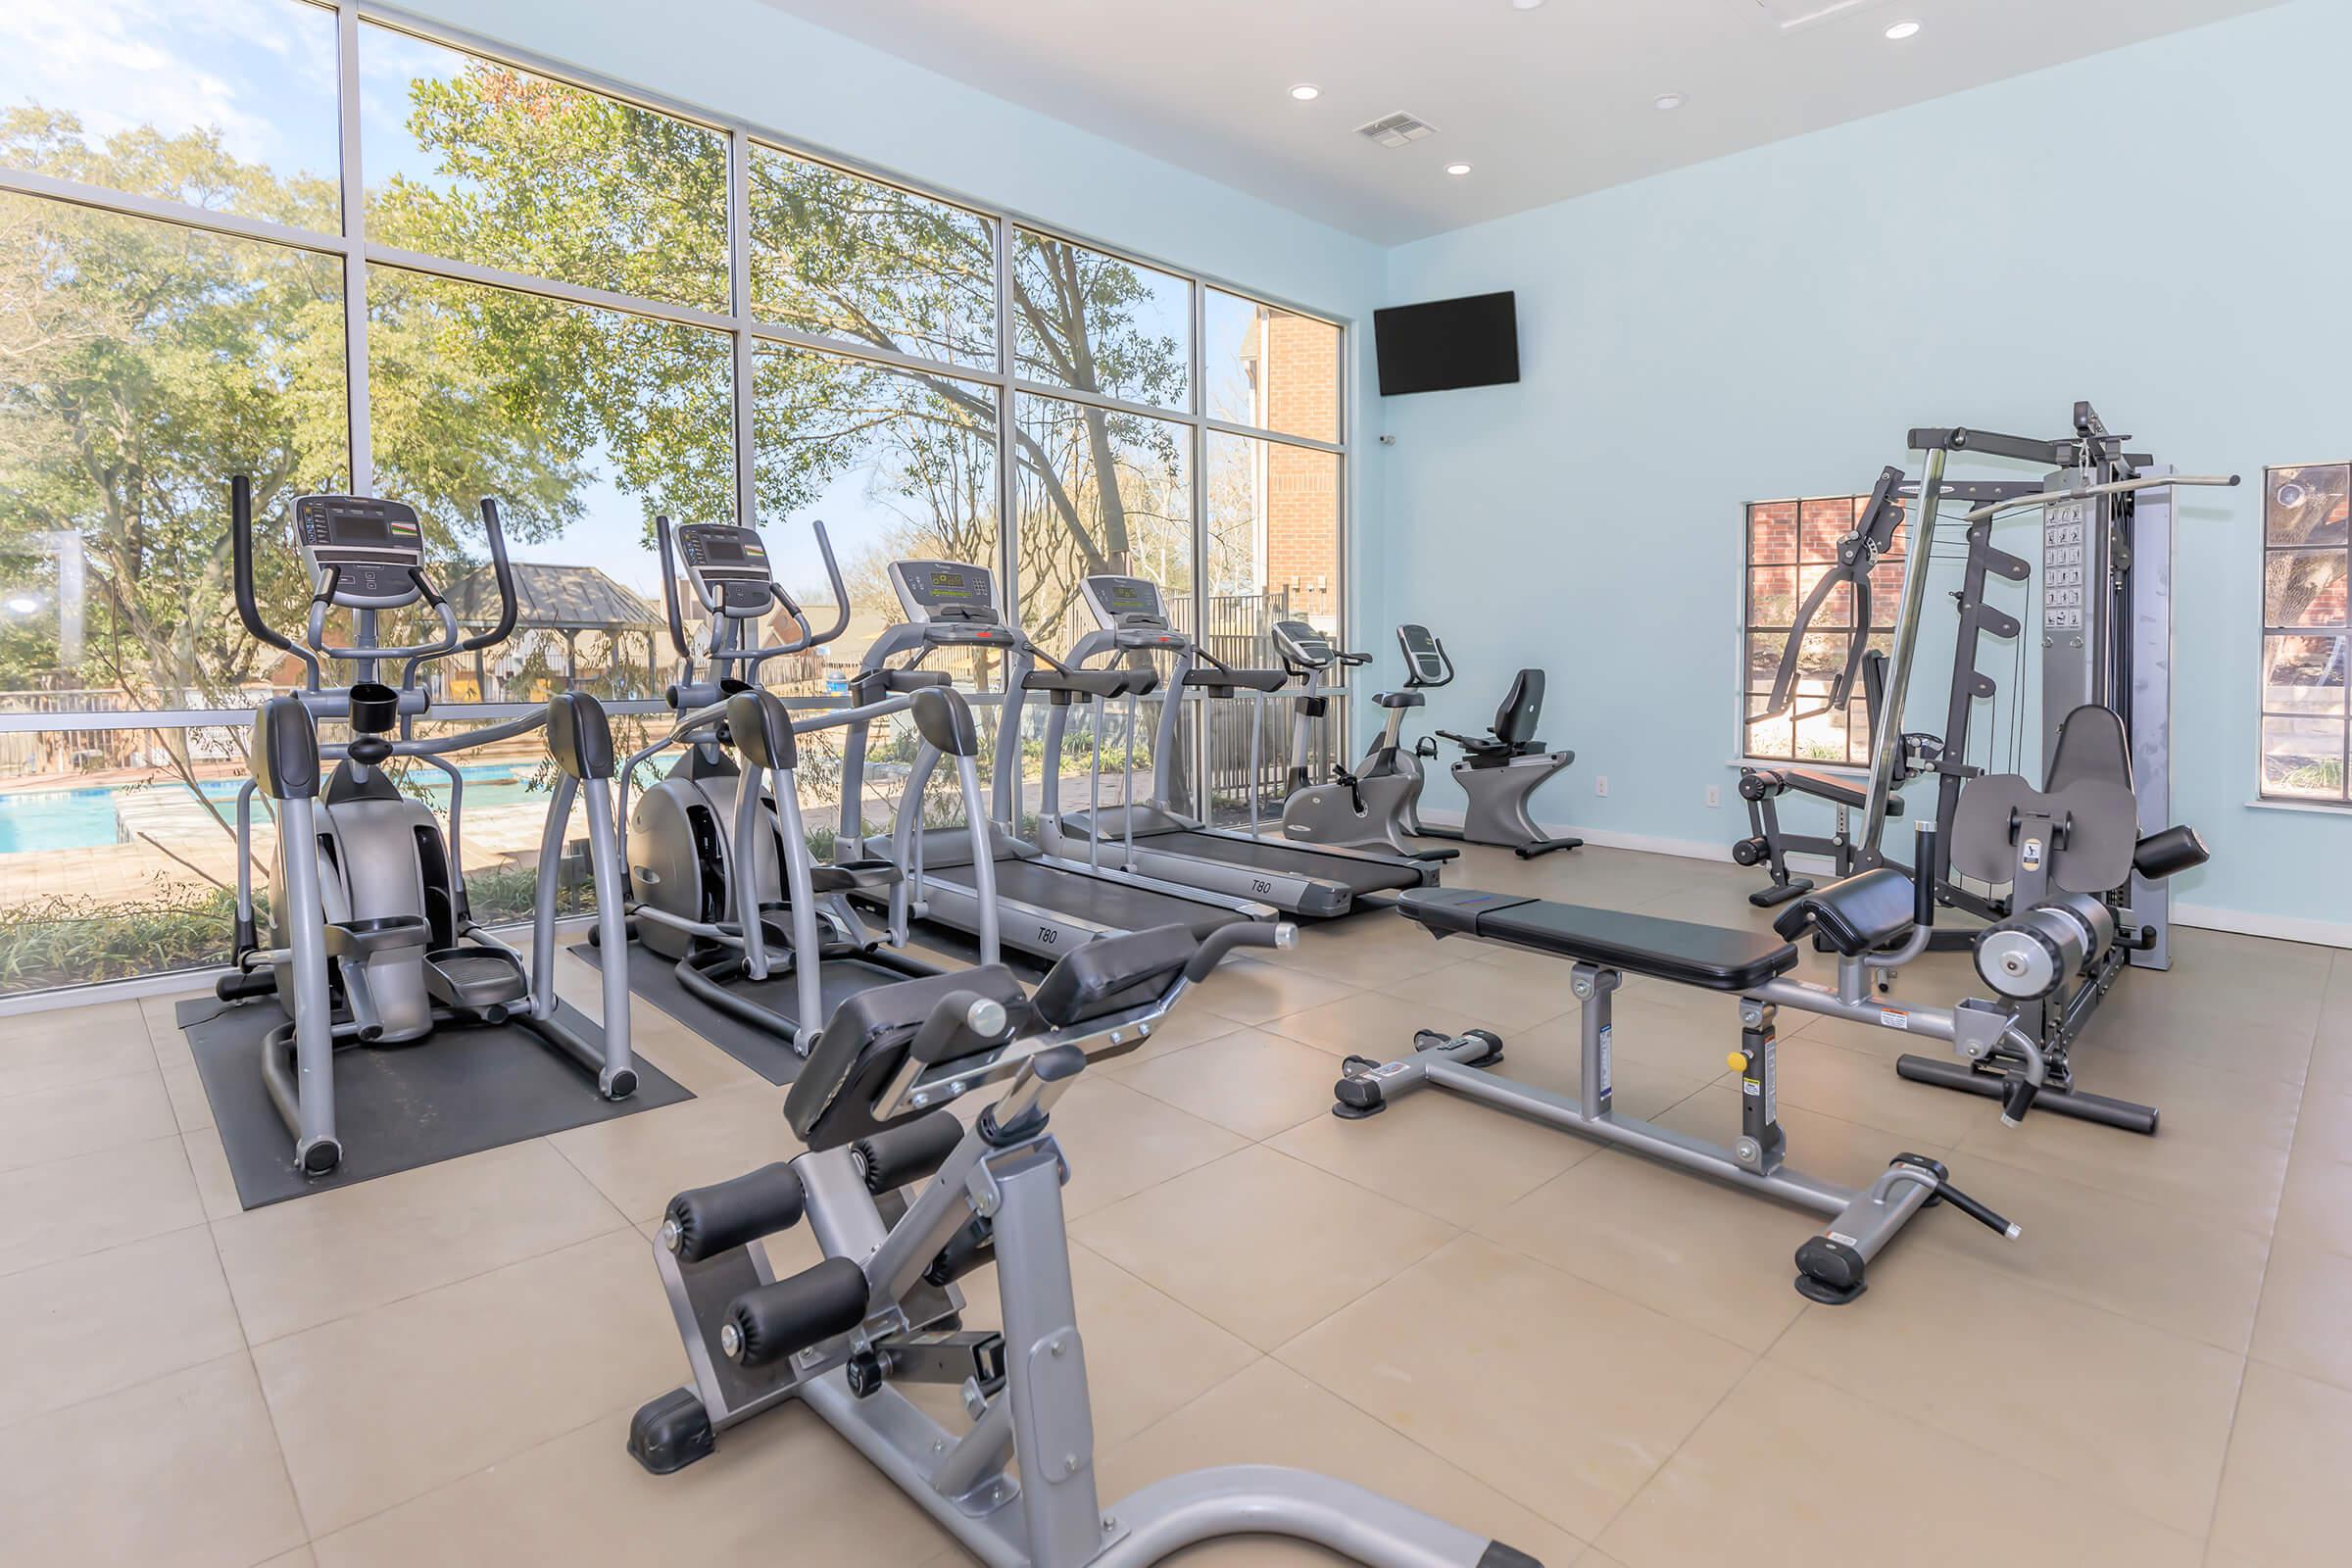 WORK OUT IN THE STATE-OF-THE-ART FITNESS CENTER